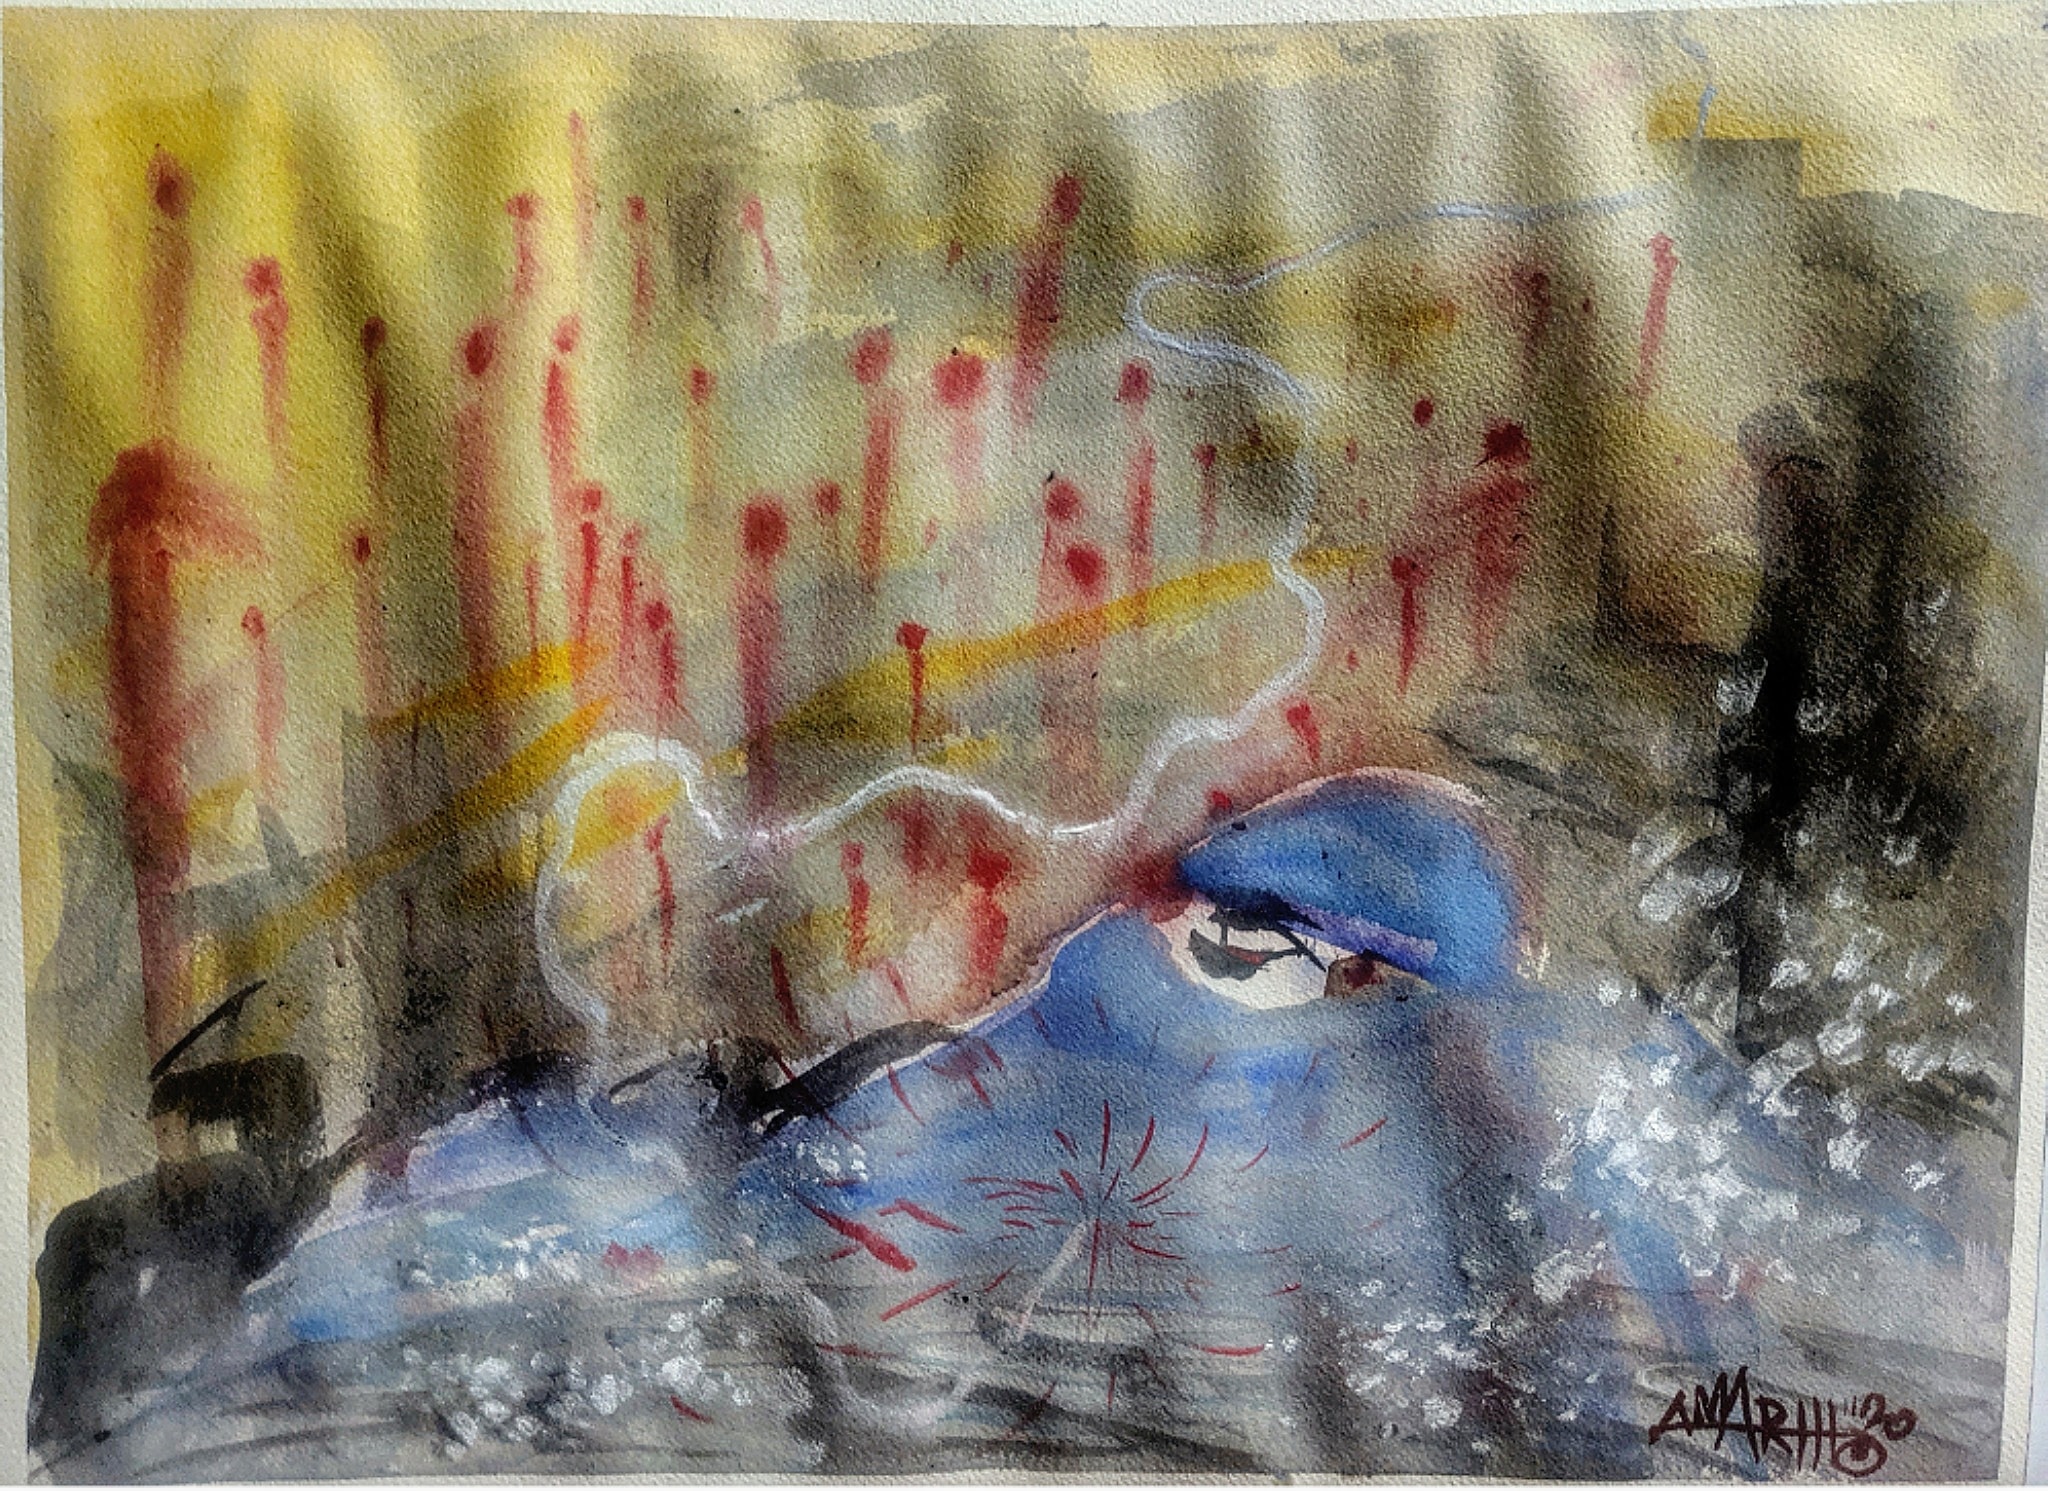 no. 3 - Iran
(quarantine paintings, 2020)

watercolor, oil, gesso on arches paper, 18x24